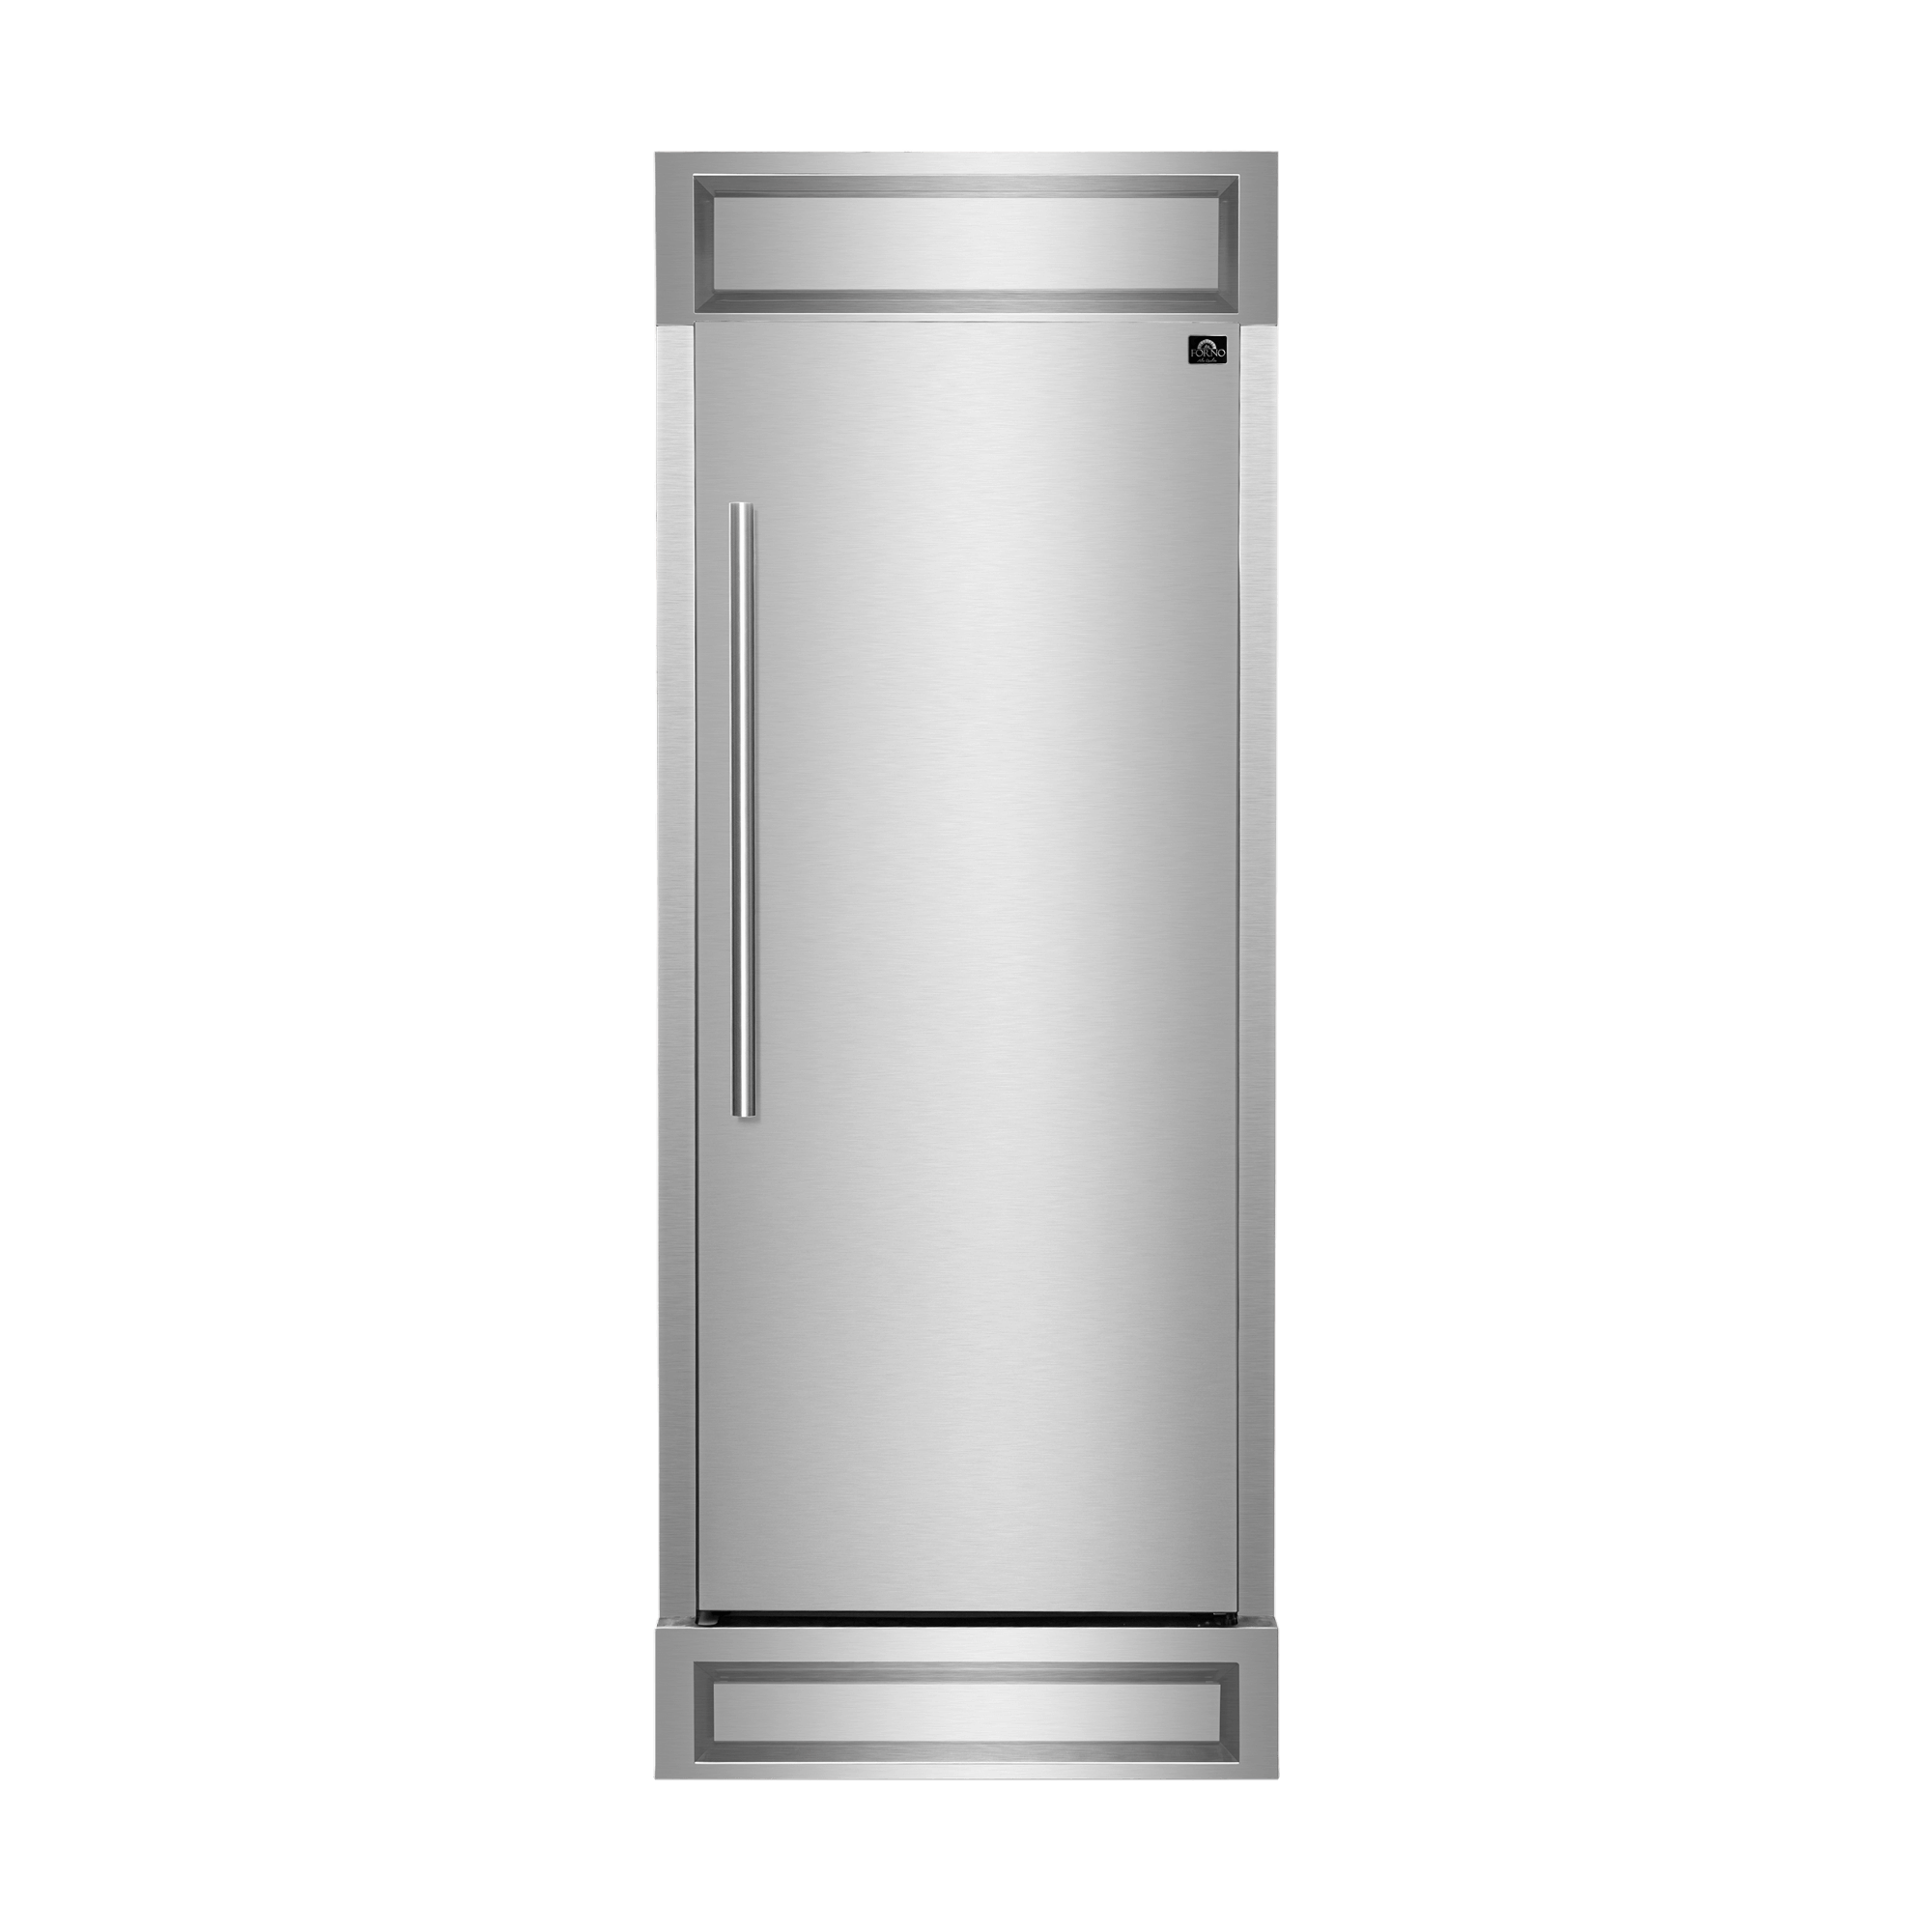 Forno Maderno 32" Right Hinge Built-In Refrigerator Freezer FFFFD1722-32RS Wine Coolers Empire